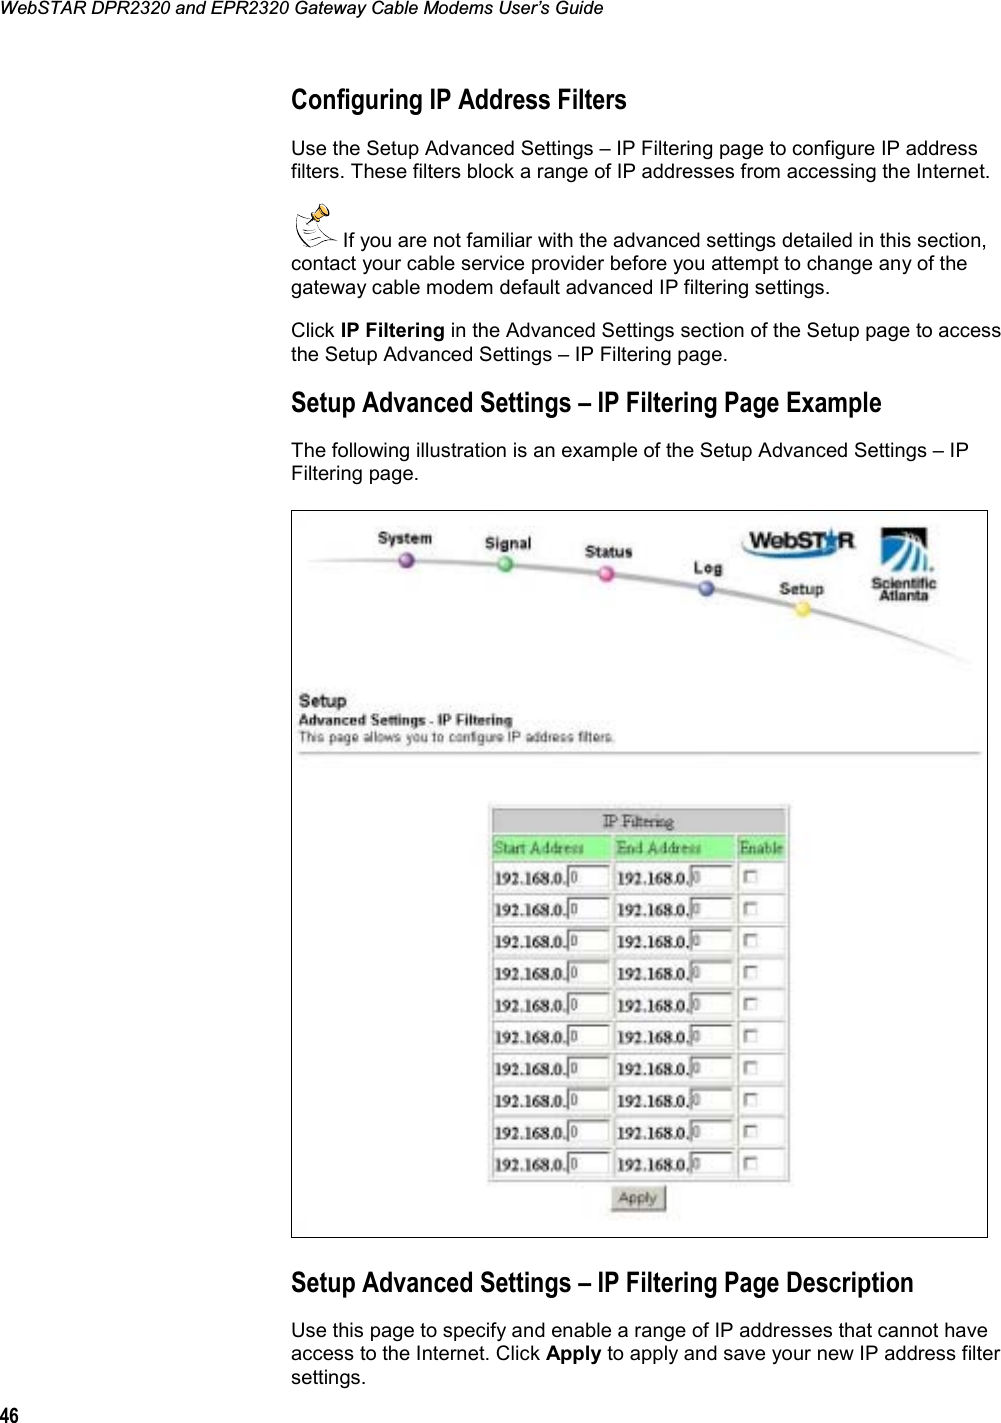 WebSTAR DPR2320 and EPR2320 Gateway Cable Modems User’s Guide 46Configuring IP Address Filters Use the Setup Advanced Settings – IP Filtering page to configure IP address filters. These filters block a range of IP addresses from accessing the Internet.  If you are not familiar with the advanced settings detailed in this section, contact your cable service provider before you attempt to change any of the gateway cable modem default advanced IP filtering settings. Click IP Filtering in the Advanced Settings section of the Setup page to access the Setup Advanced Settings – IP Filtering page. Setup Advanced Settings – IP Filtering Page Example The following illustration is an example of the Setup Advanced Settings – IP Filtering page. Setup Advanced Settings – IP Filtering Page Description Use this page to specify and enable a range of IP addresses that cannot have access to the Internet. Click Apply to apply and save your new IP address filter settings. 